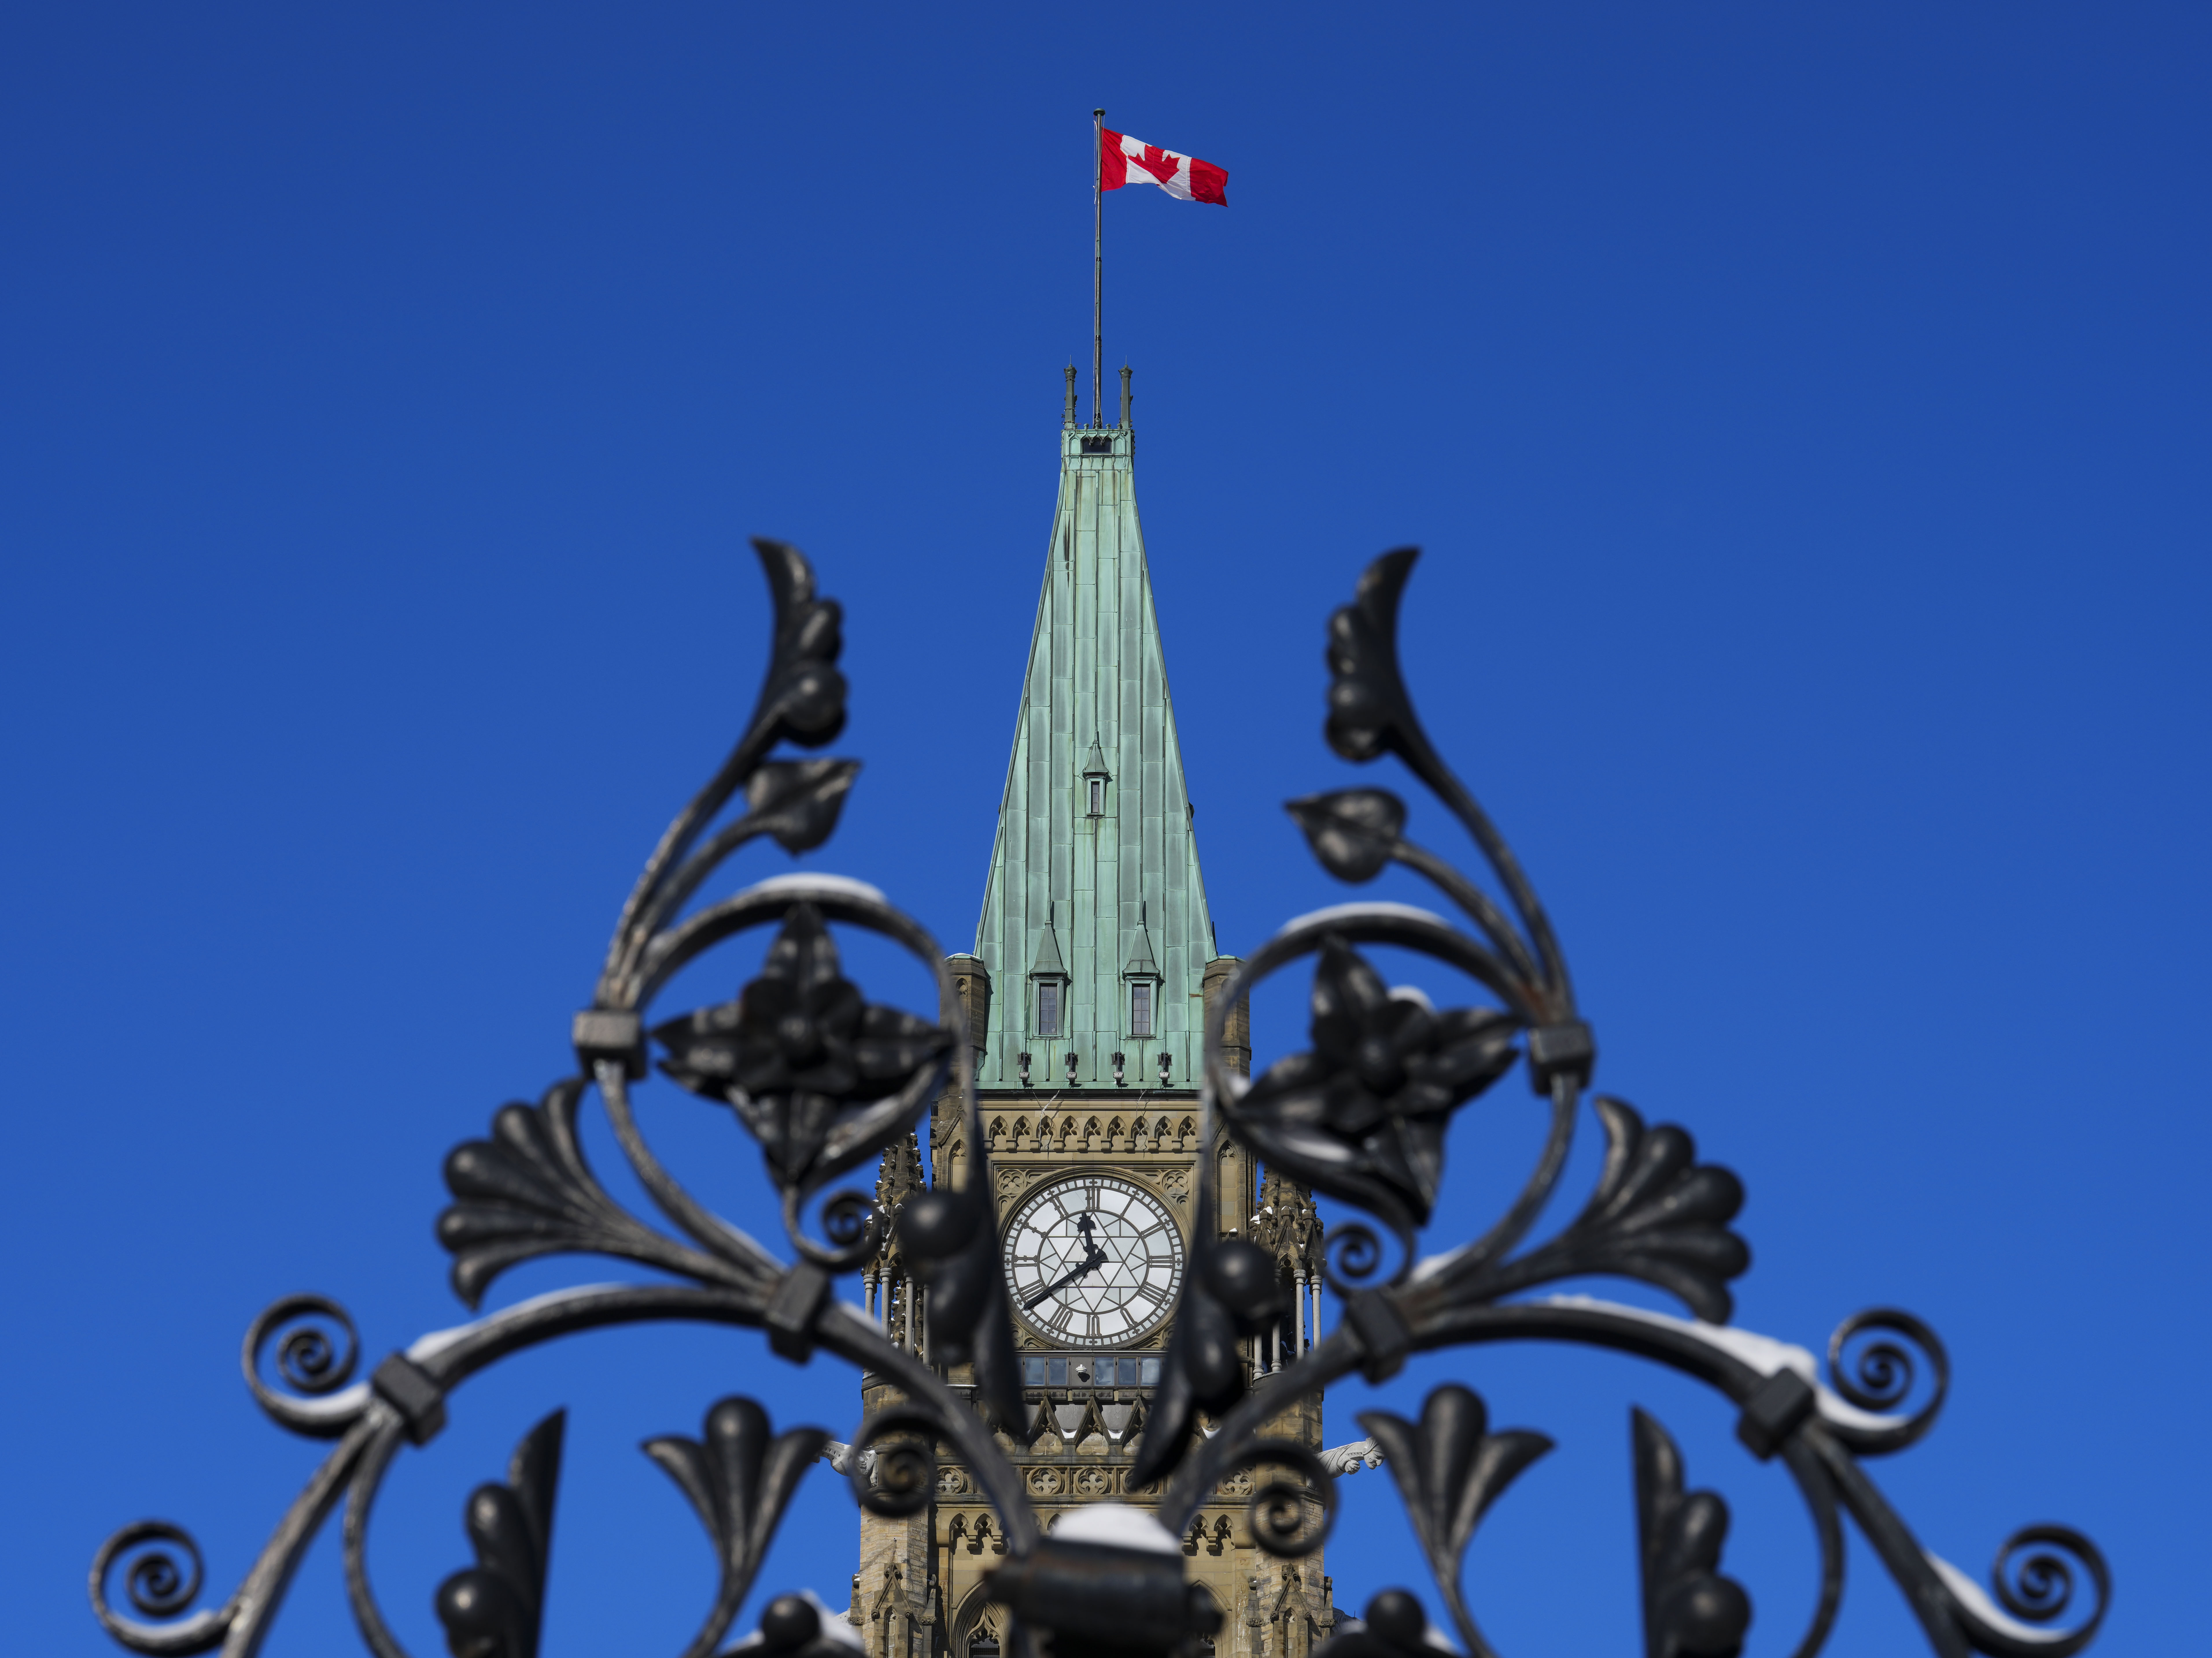 Ottawa expands foreign interference consultations, says registry support broad